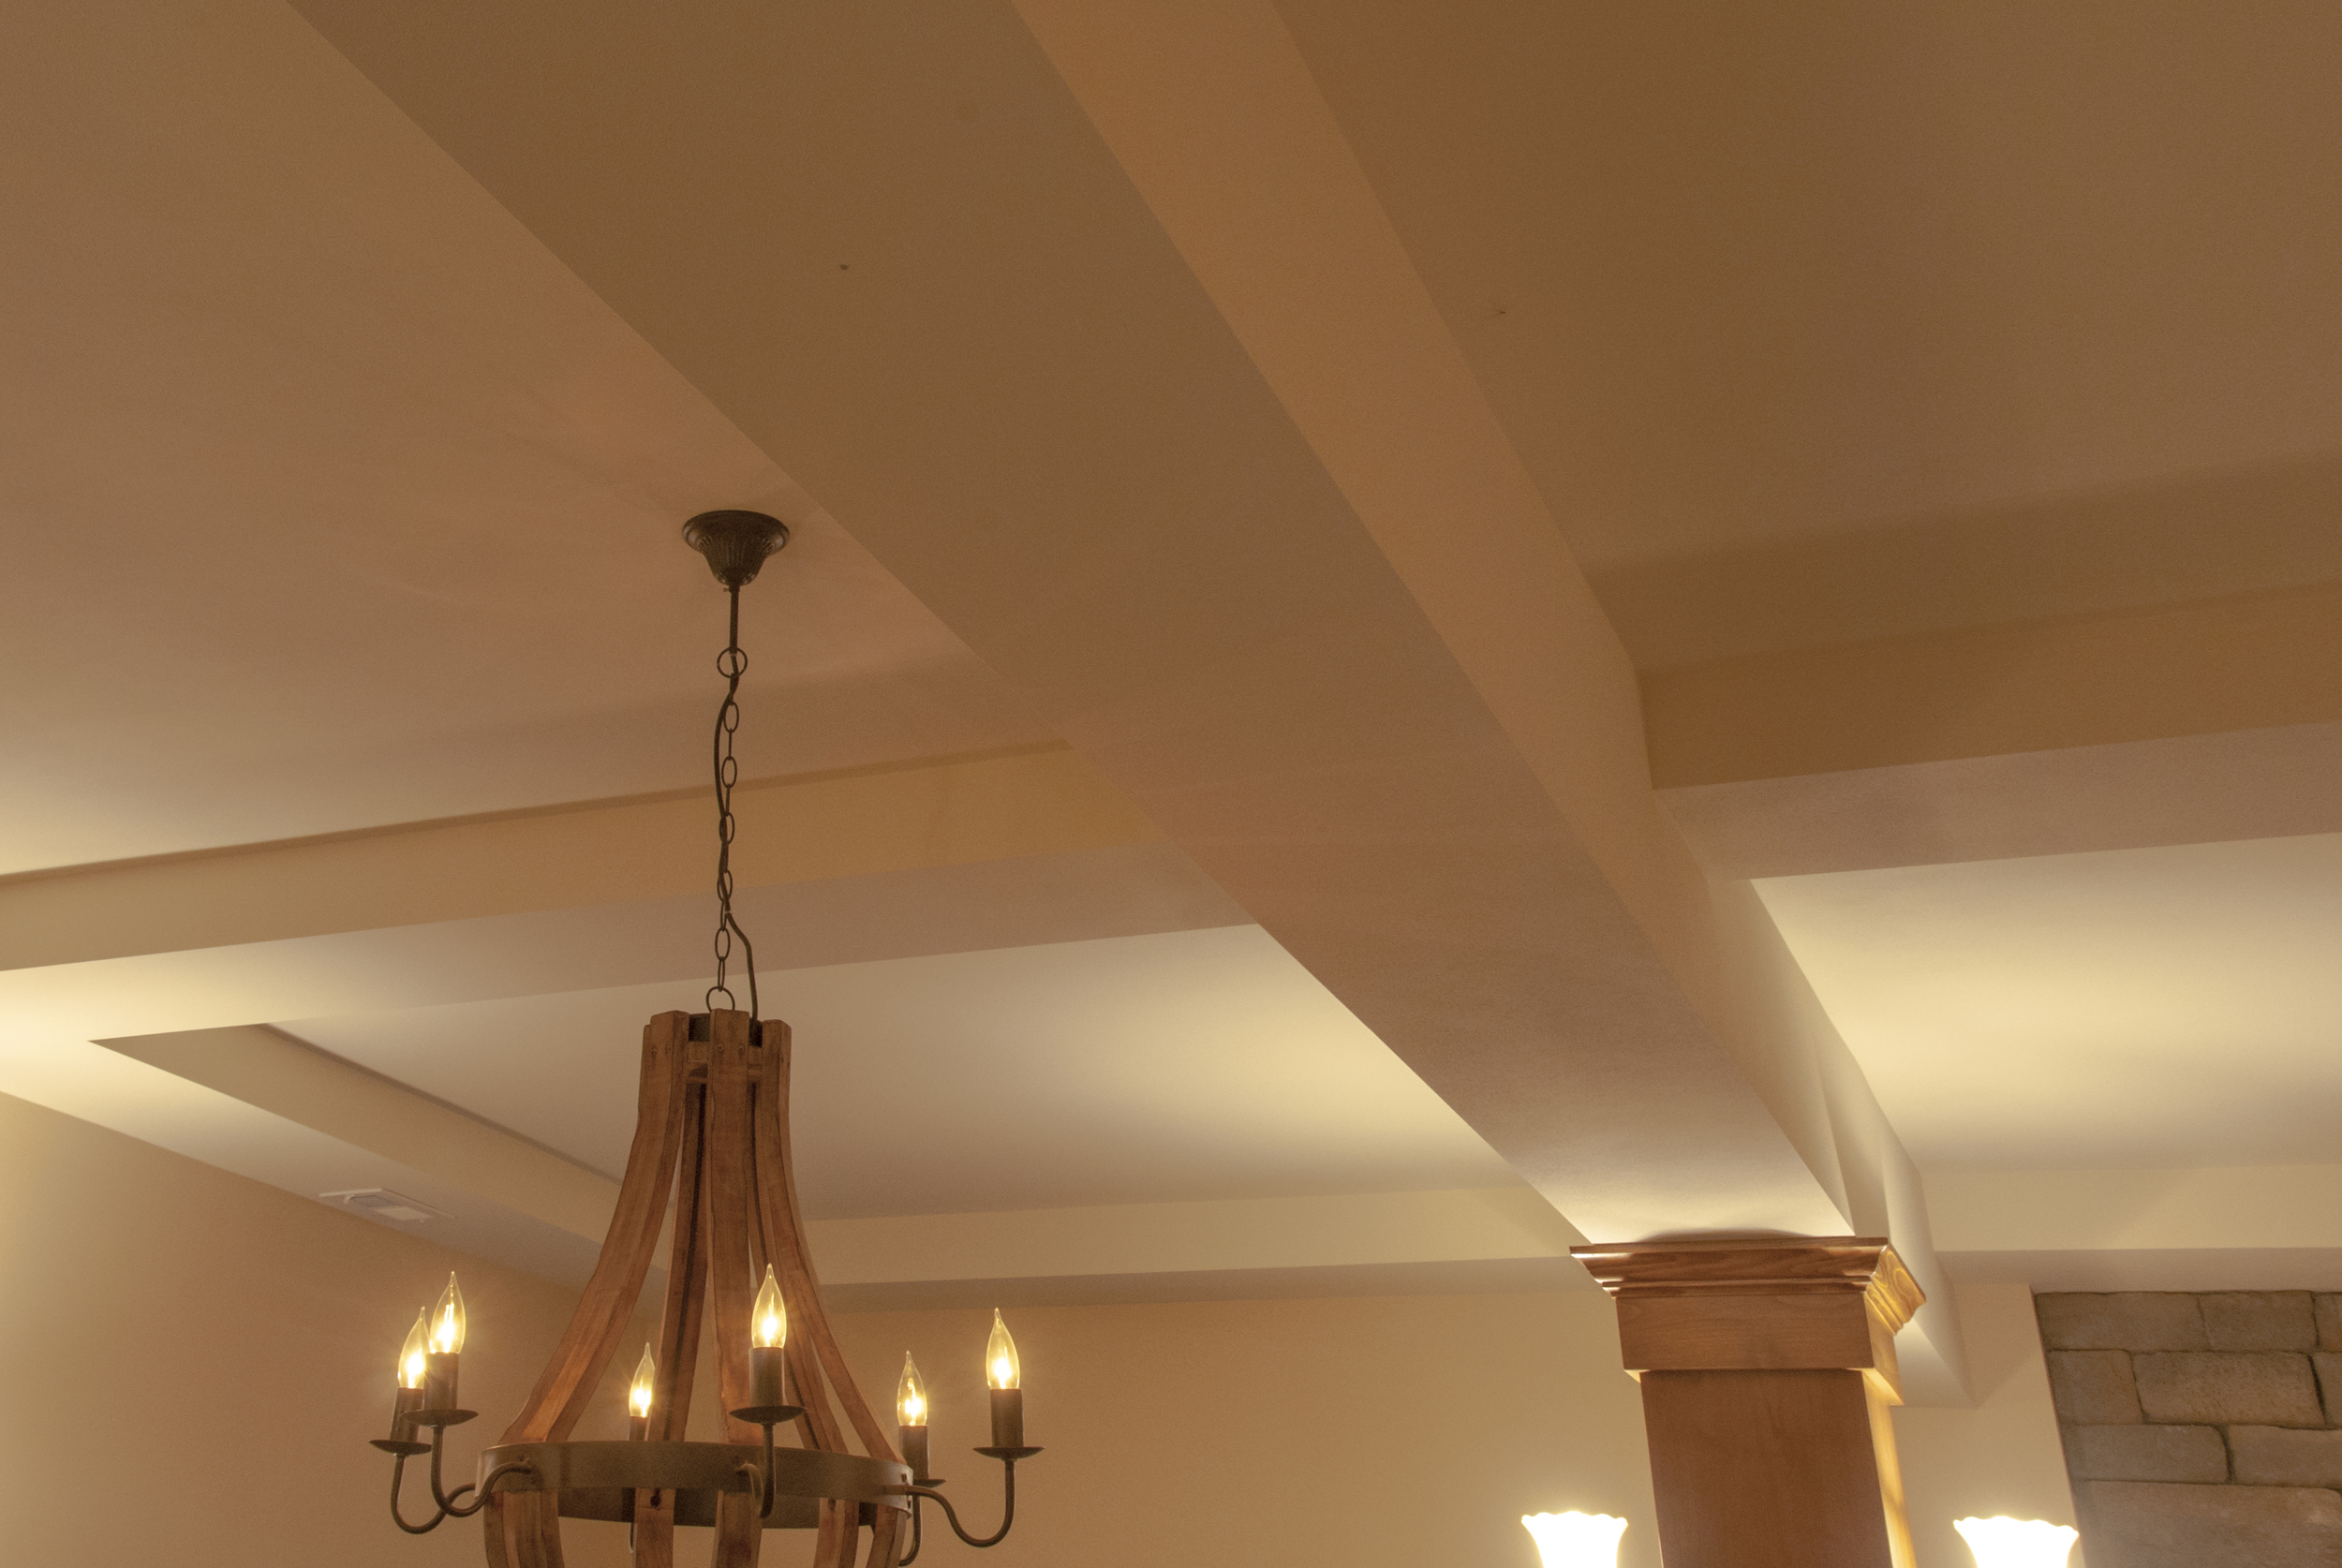  A coffered ceiling both hides the structural beams and adds drama to the 10' ceilings. 